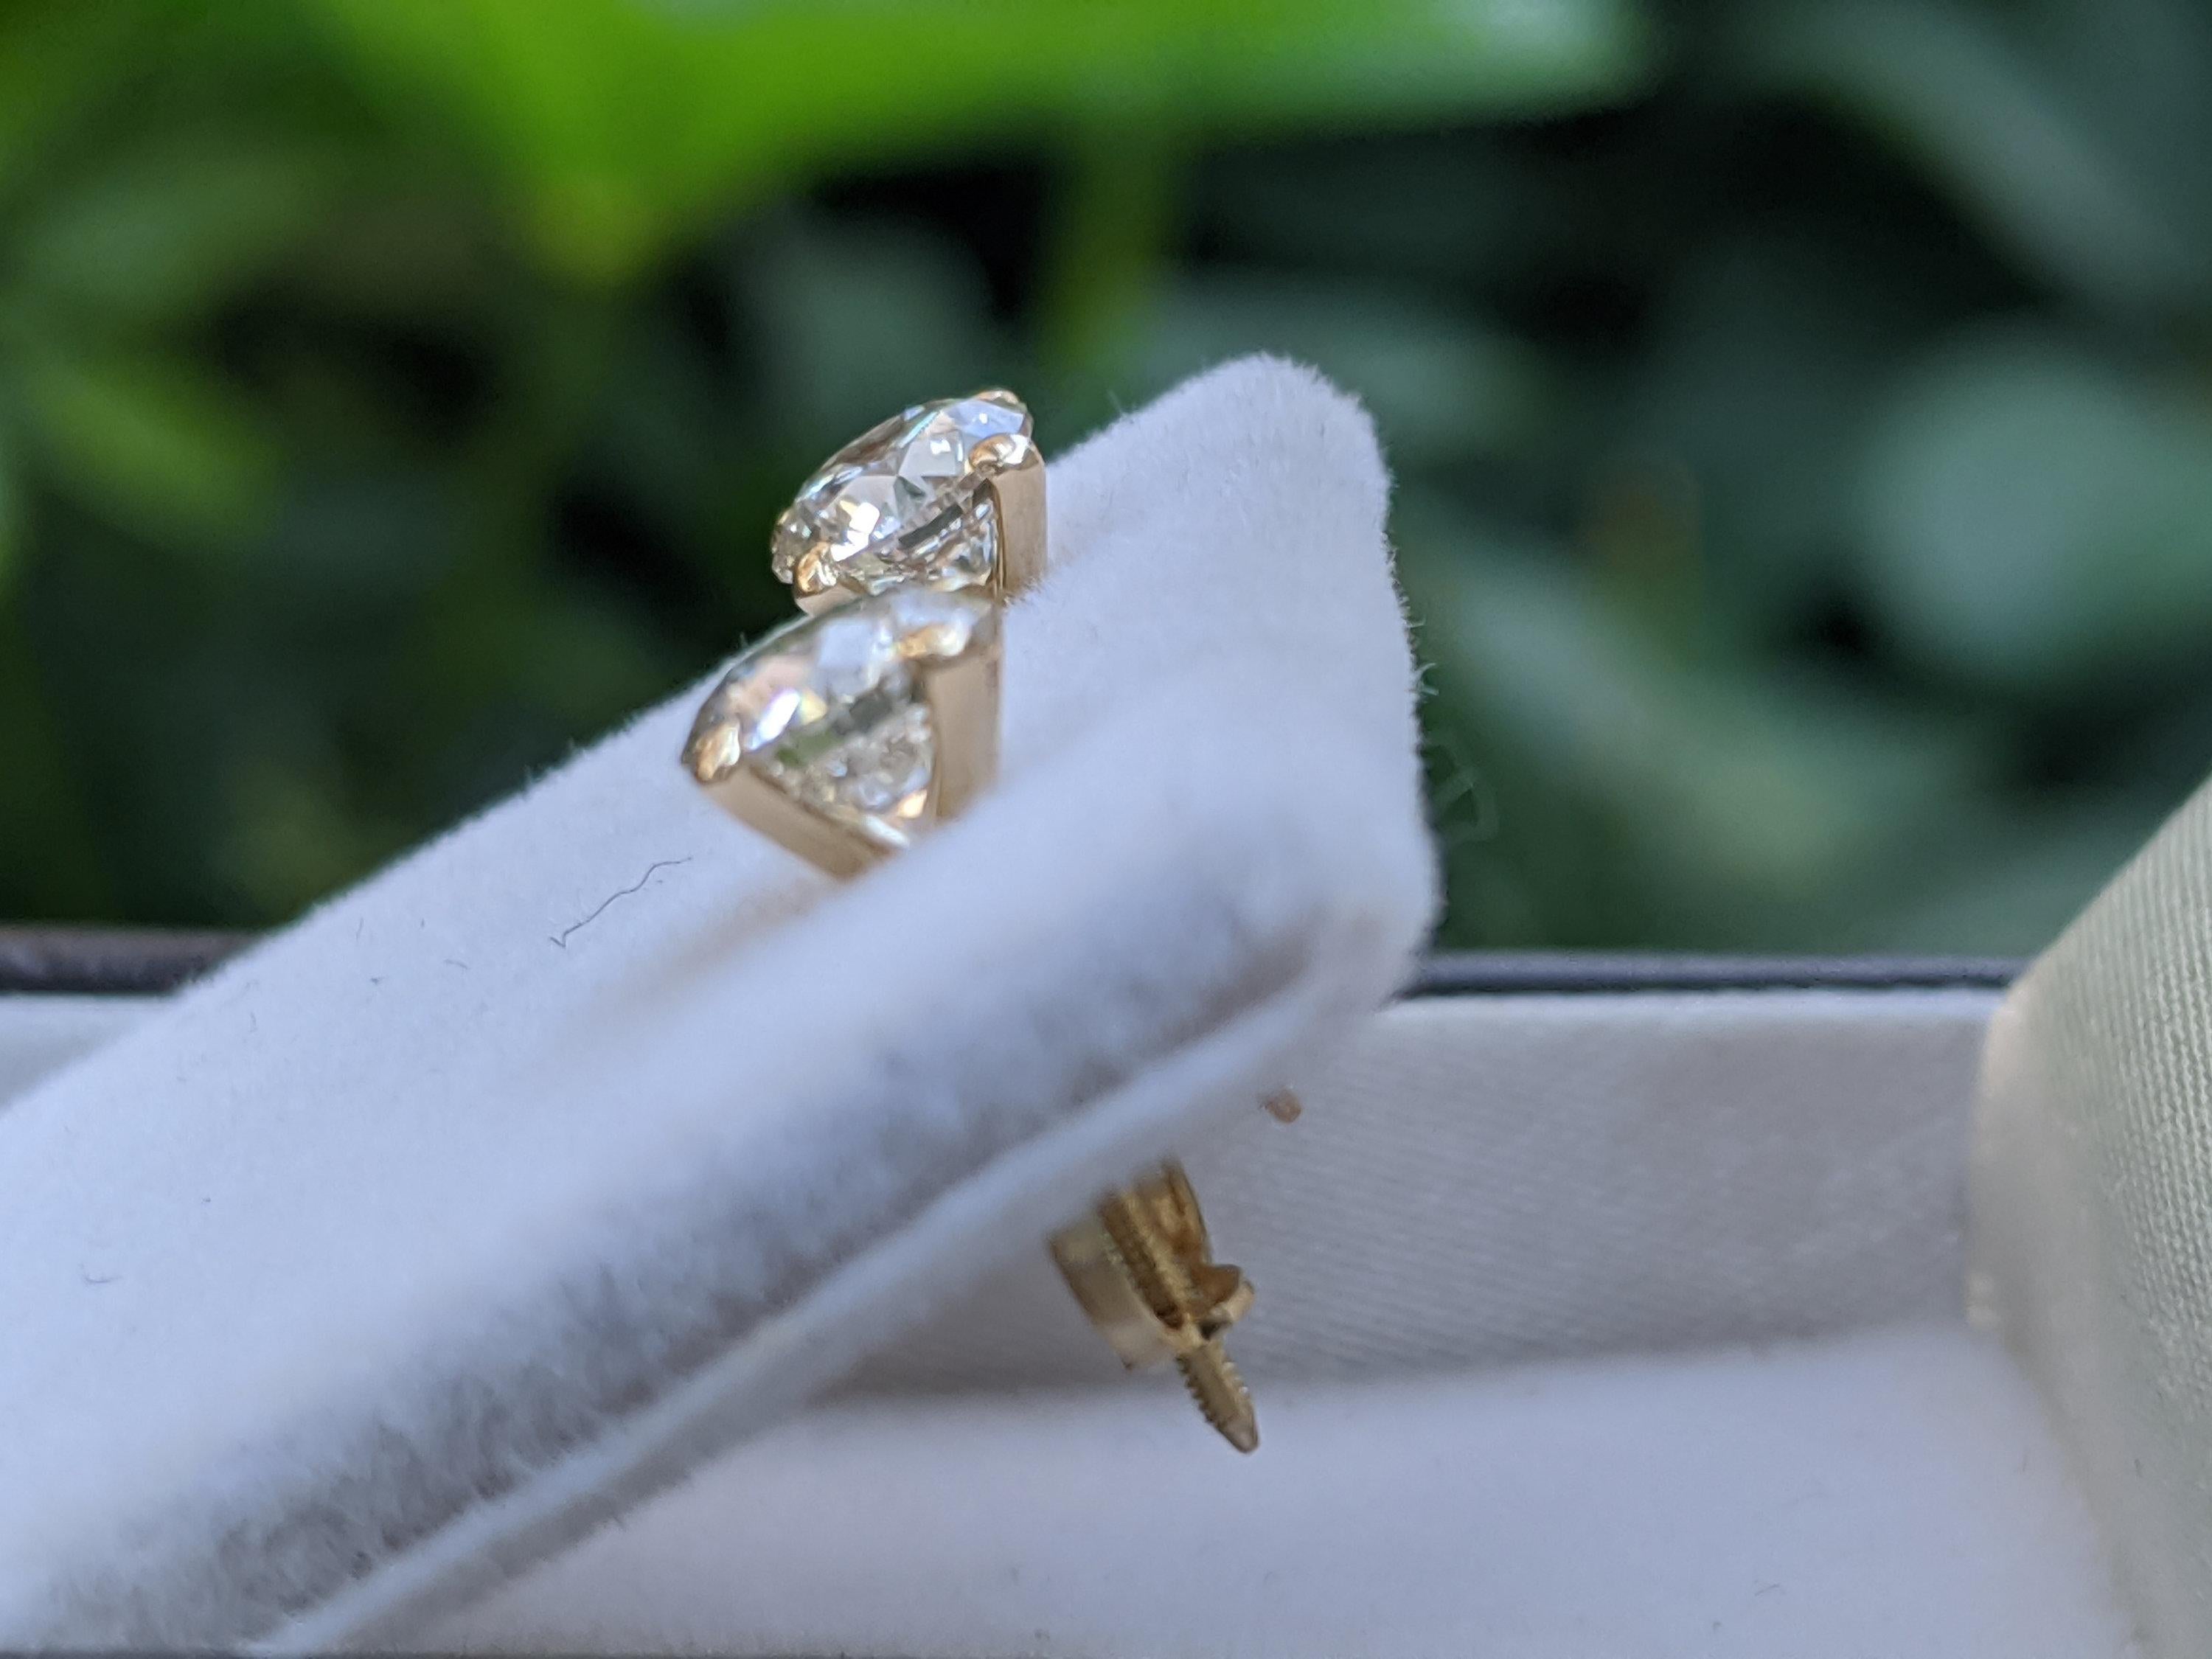 0.80 Carat Diamond Stud Earrings, Diamond Studs, 14K Gold Earring Studs, Diamond Earrings, Classic Diamond Studs, Diamond Stud Earrings
 
 A classic solitaire Diamond stud earrings made of 14K Yellow Gold set with a pair of excellent Round cut